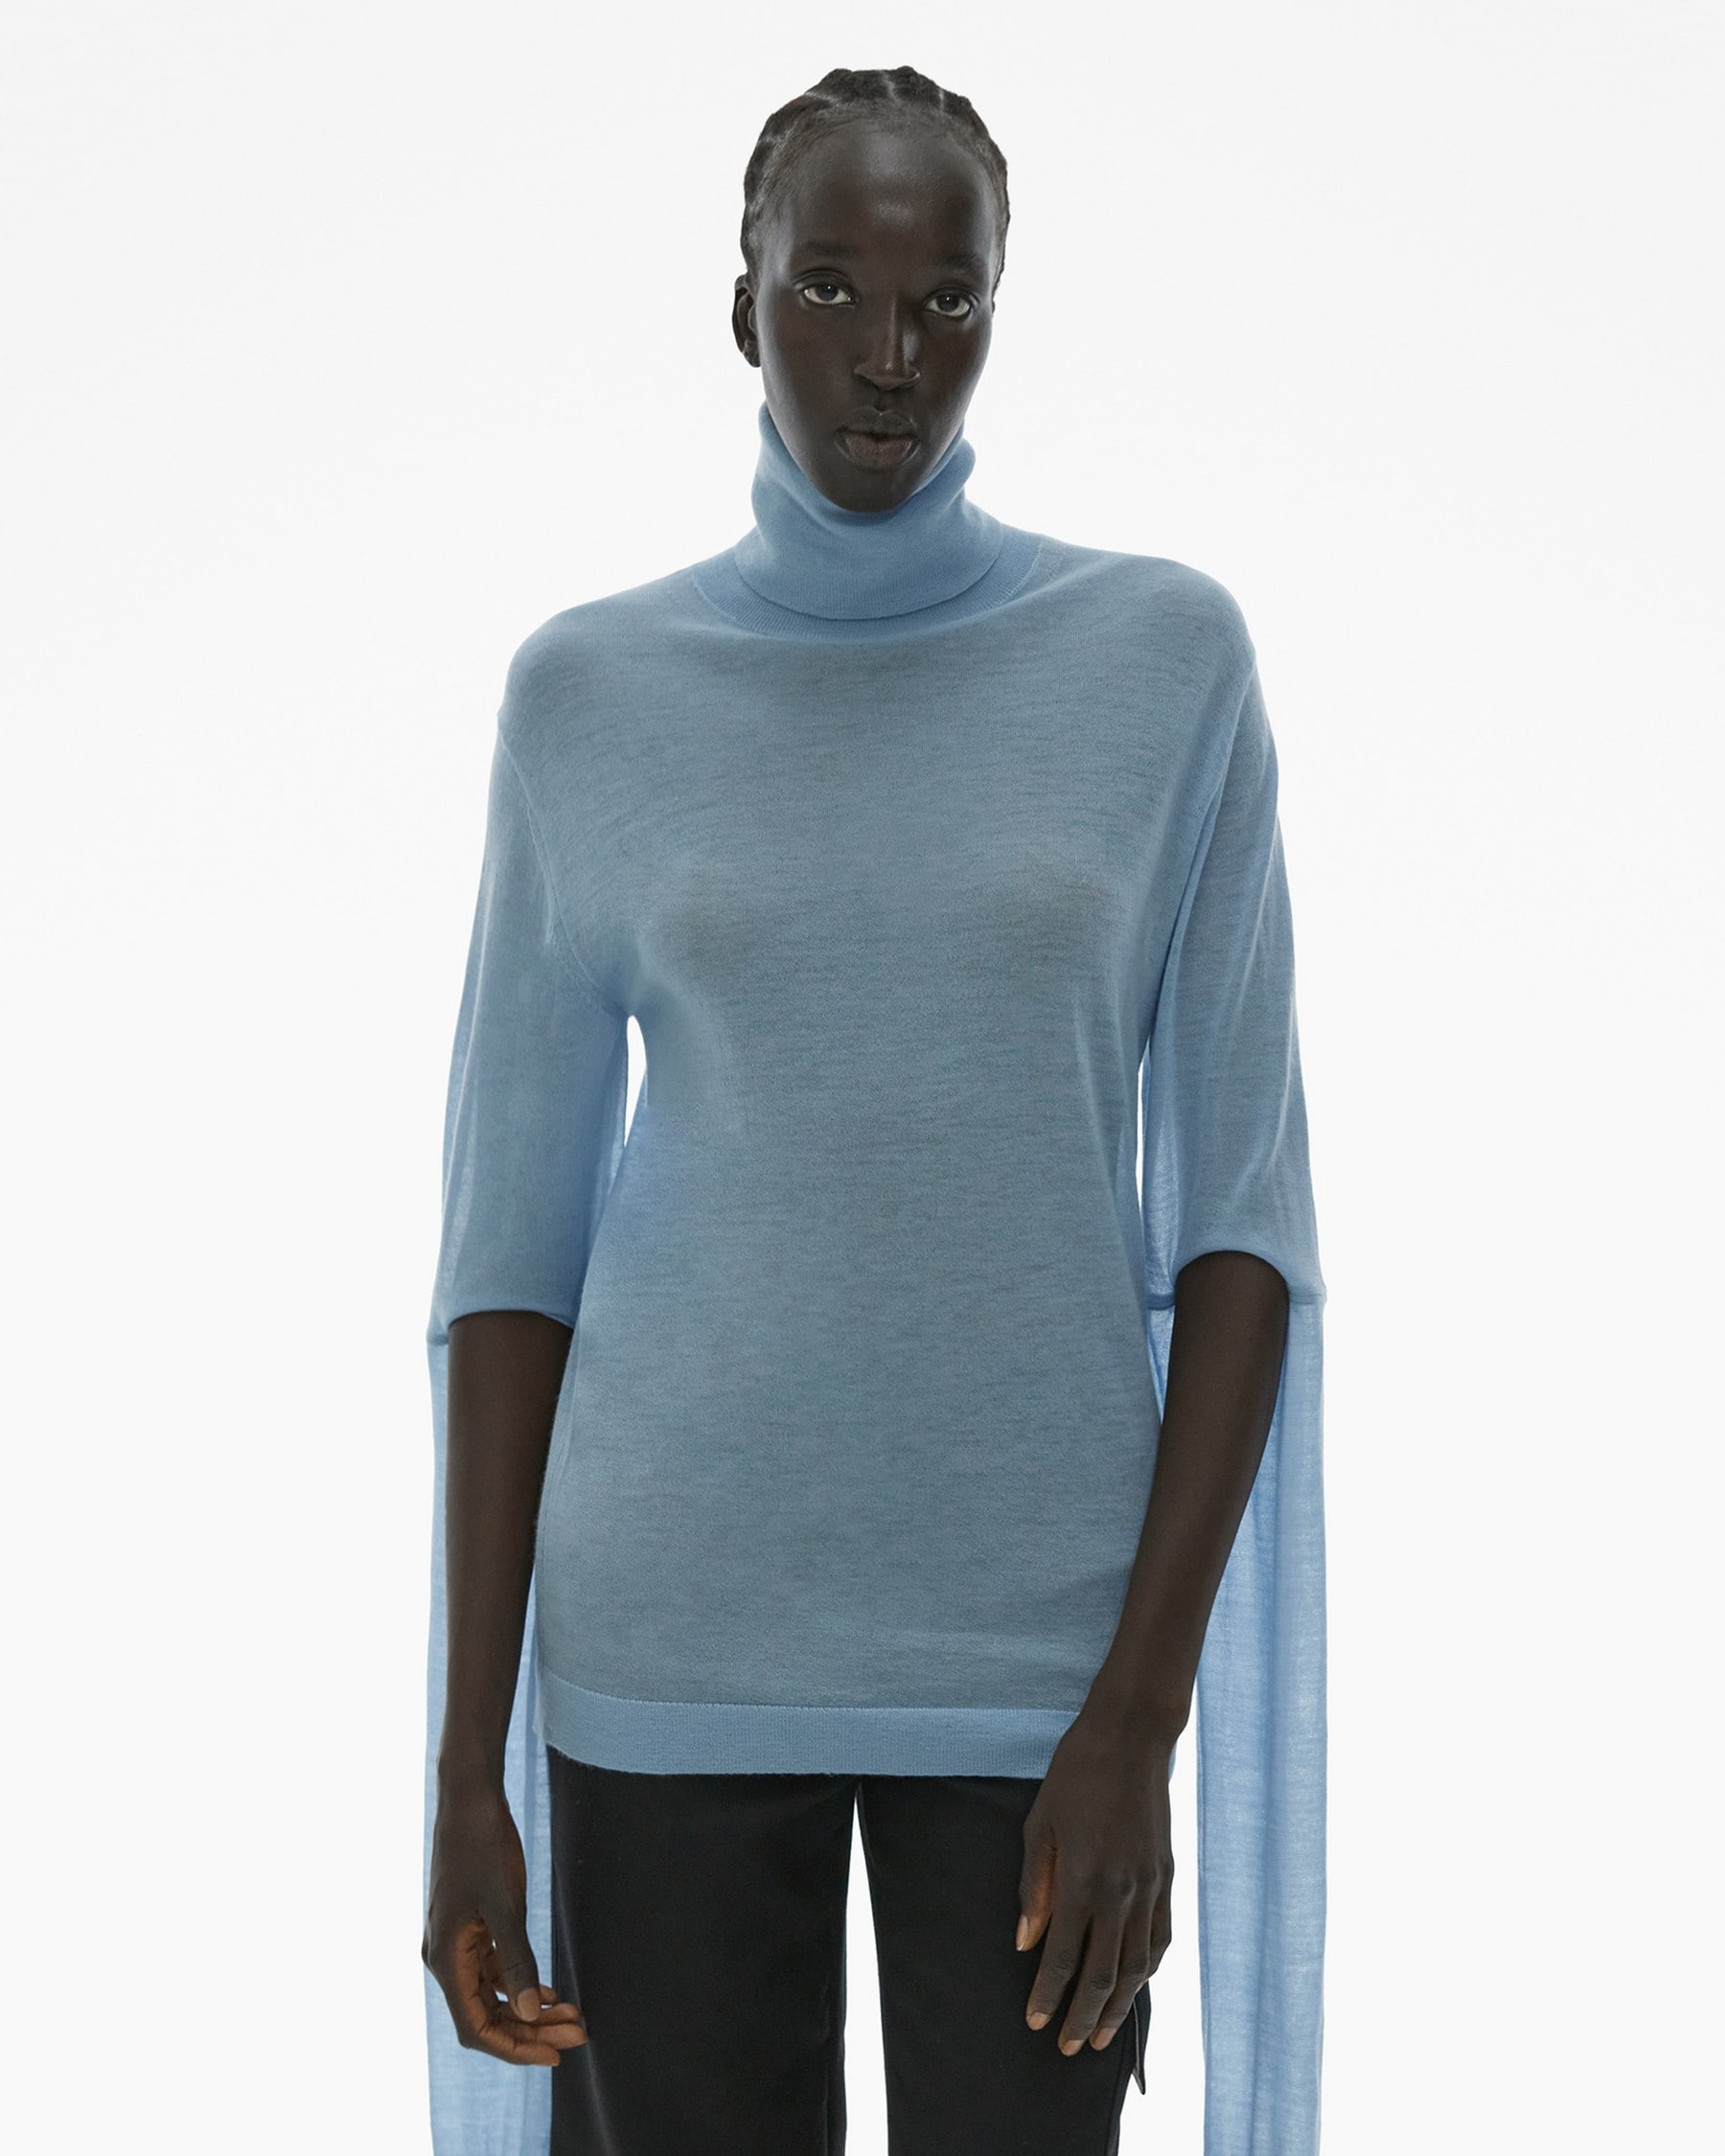 CUT-OUT TURTLENECK SWEATER - 3